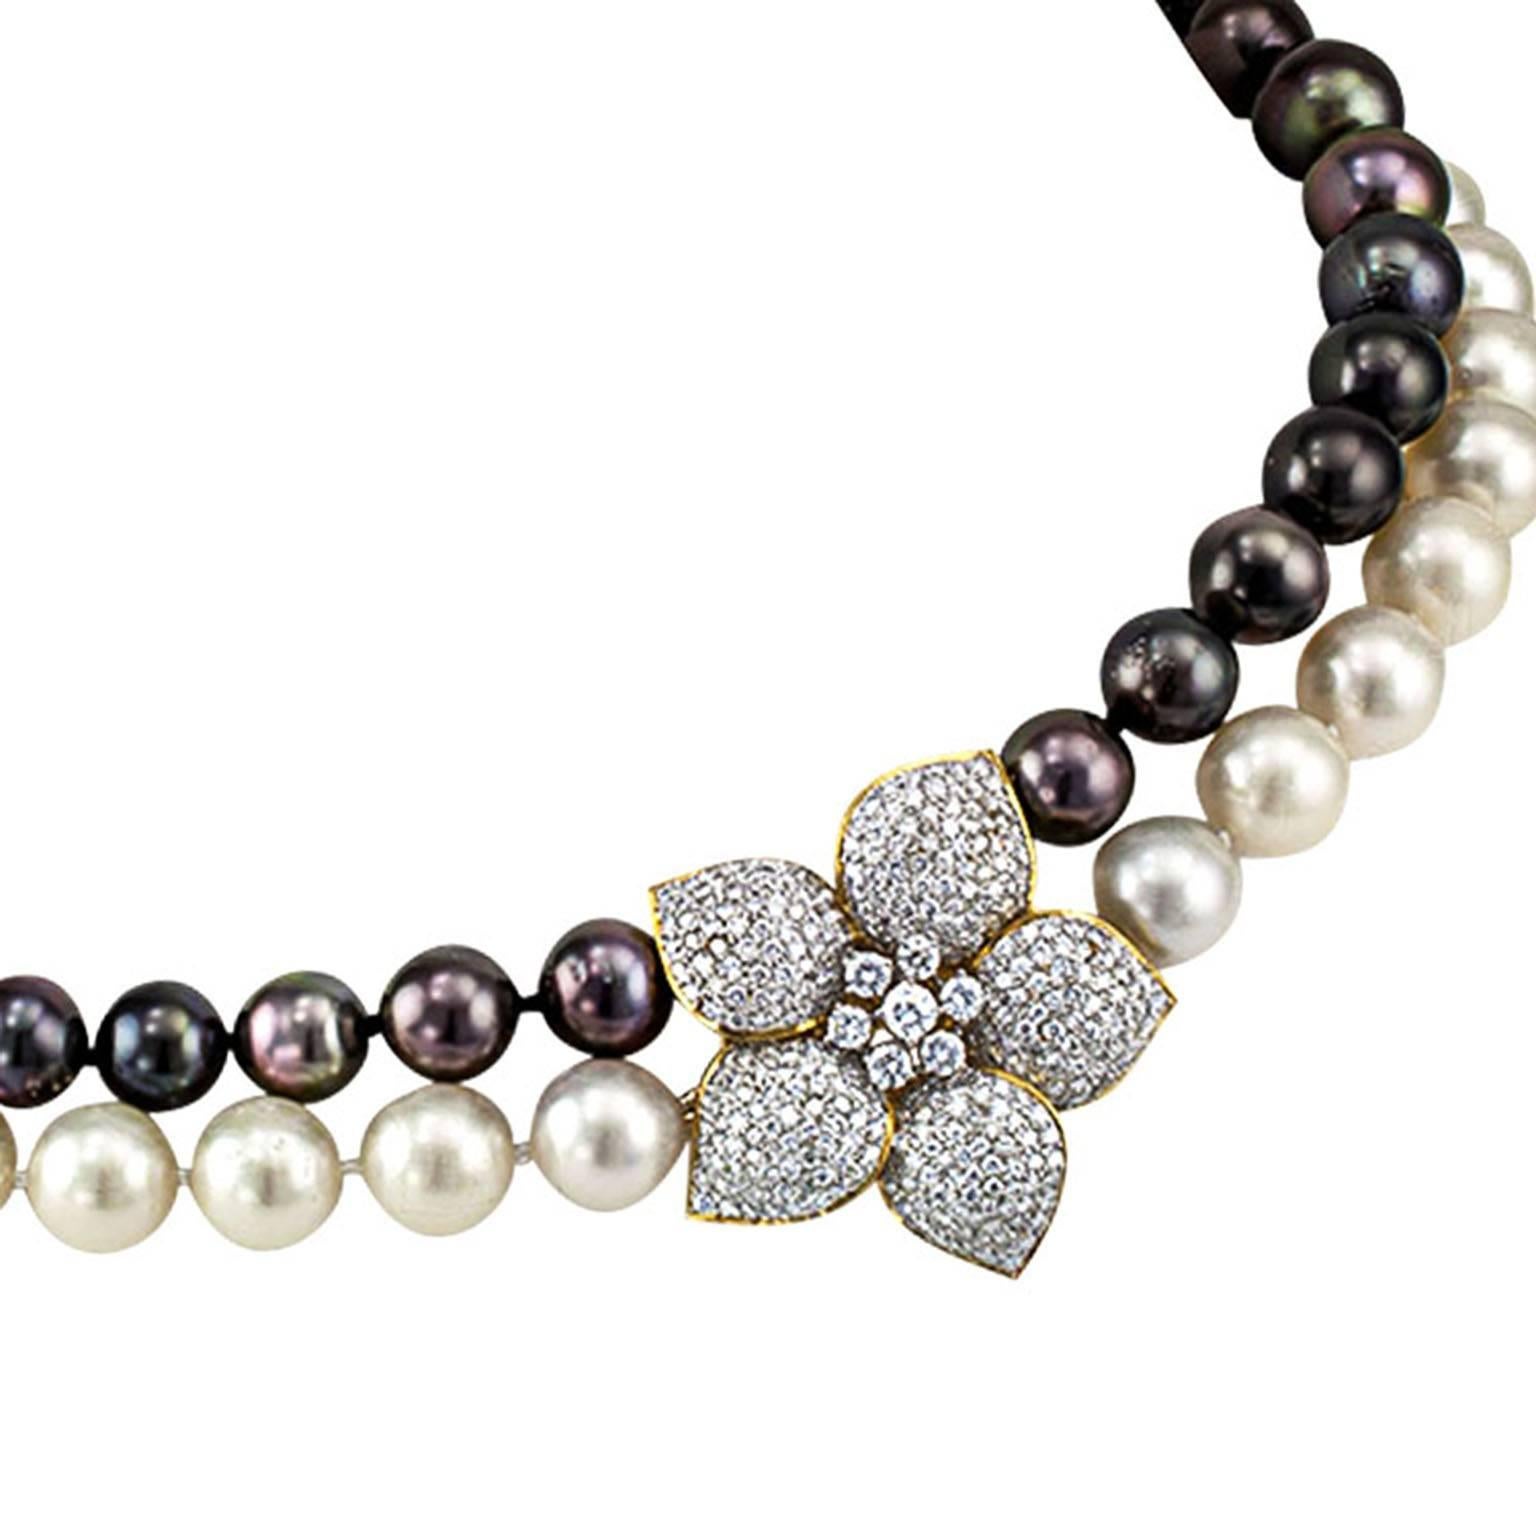 Tahitian and South Sea Pearl Necklace With Diamond Flower Clasp 2